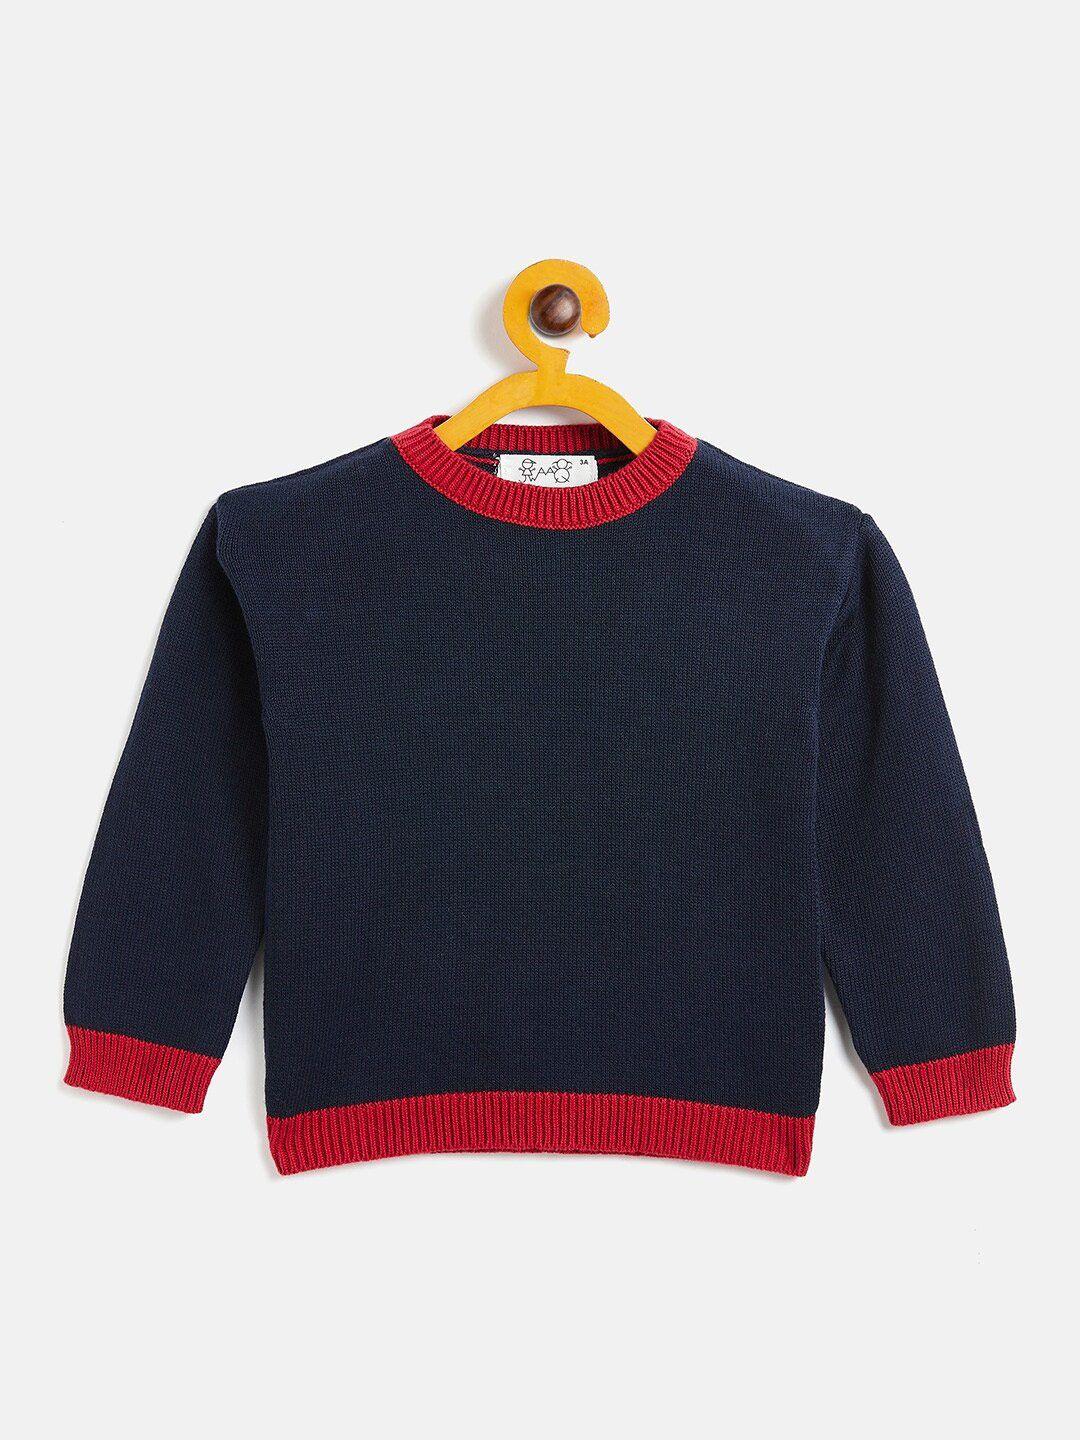 jwaaq boys navy blue & red pullover